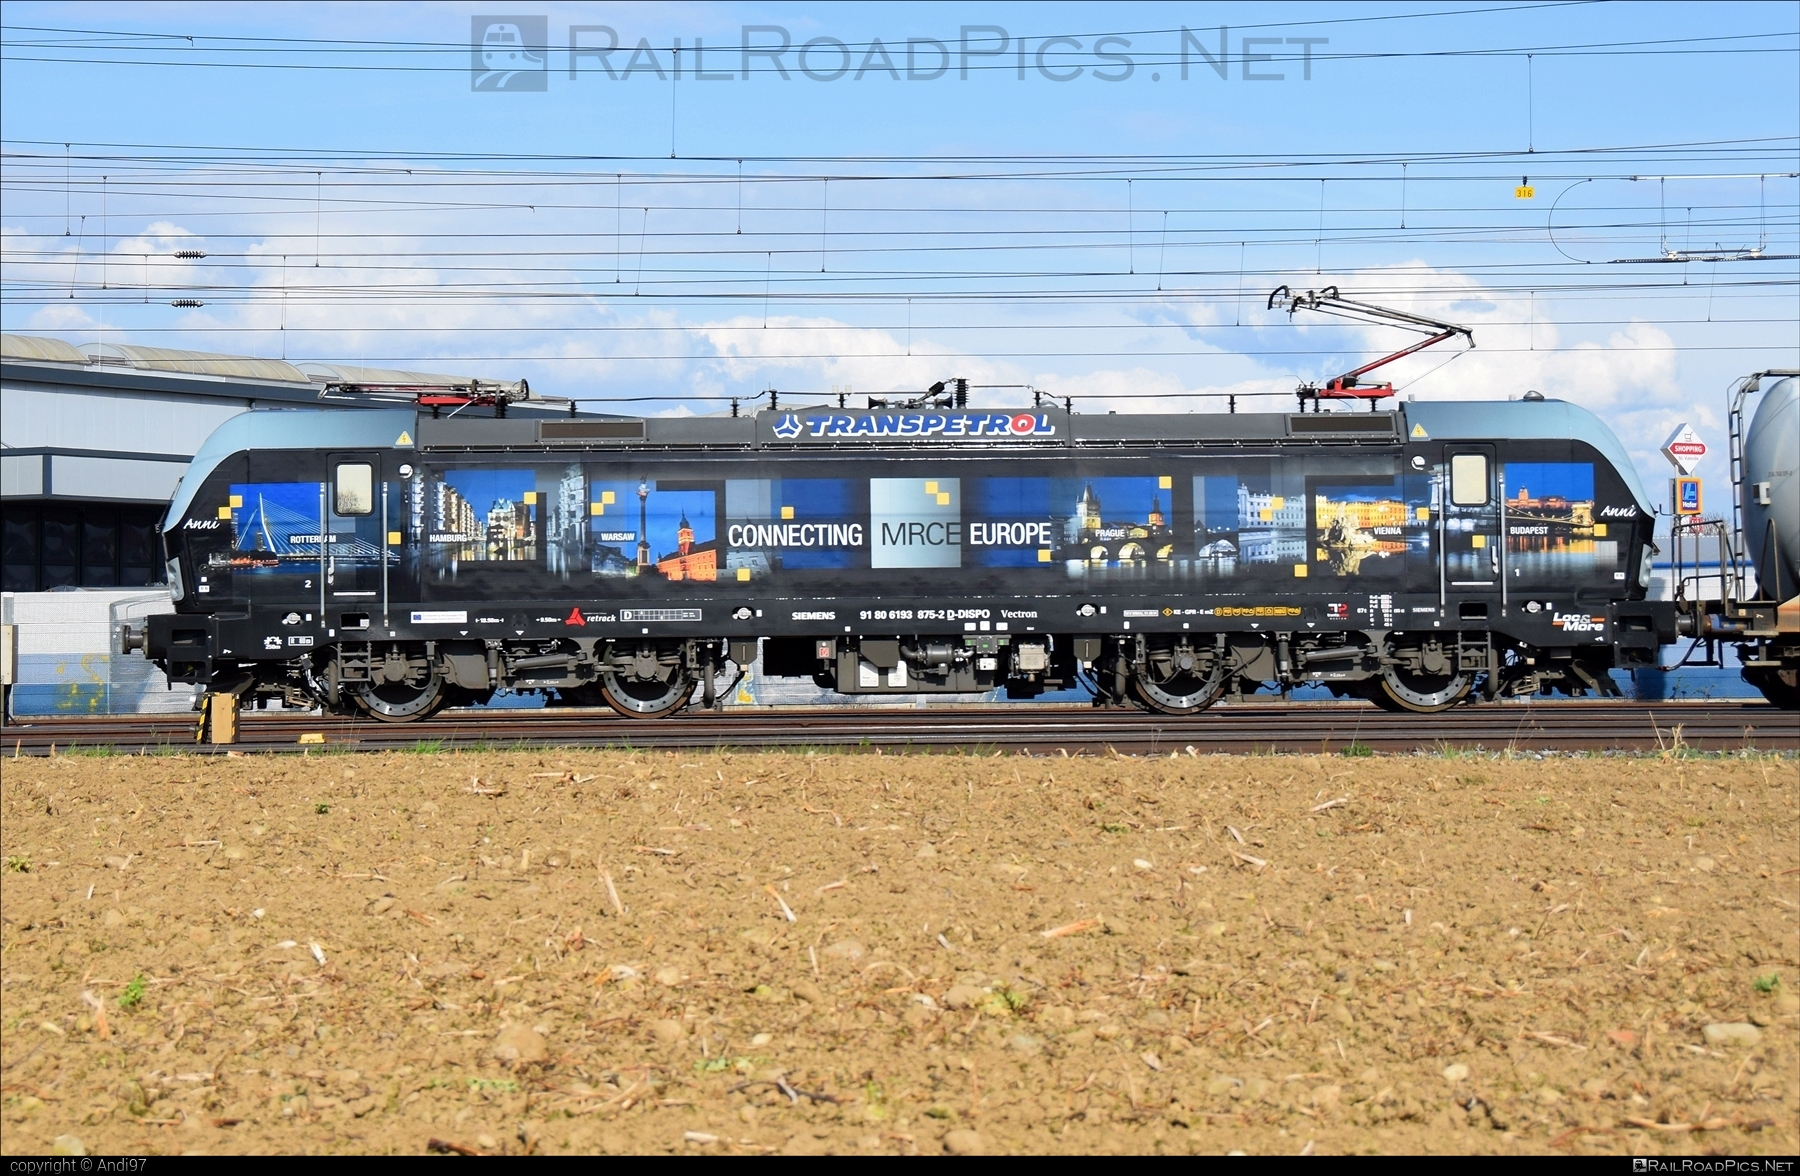 Siemens Vectron AC - 193 875 operated by Retrack GmbH & Co. KG #dispolok #mitsuirailcapitaleurope #mitsuirailcapitaleuropegmbh #mrce #retrack #retrackgmbh #siemens #siemensVectron #siemensVectronAC #vectron #vectronAC